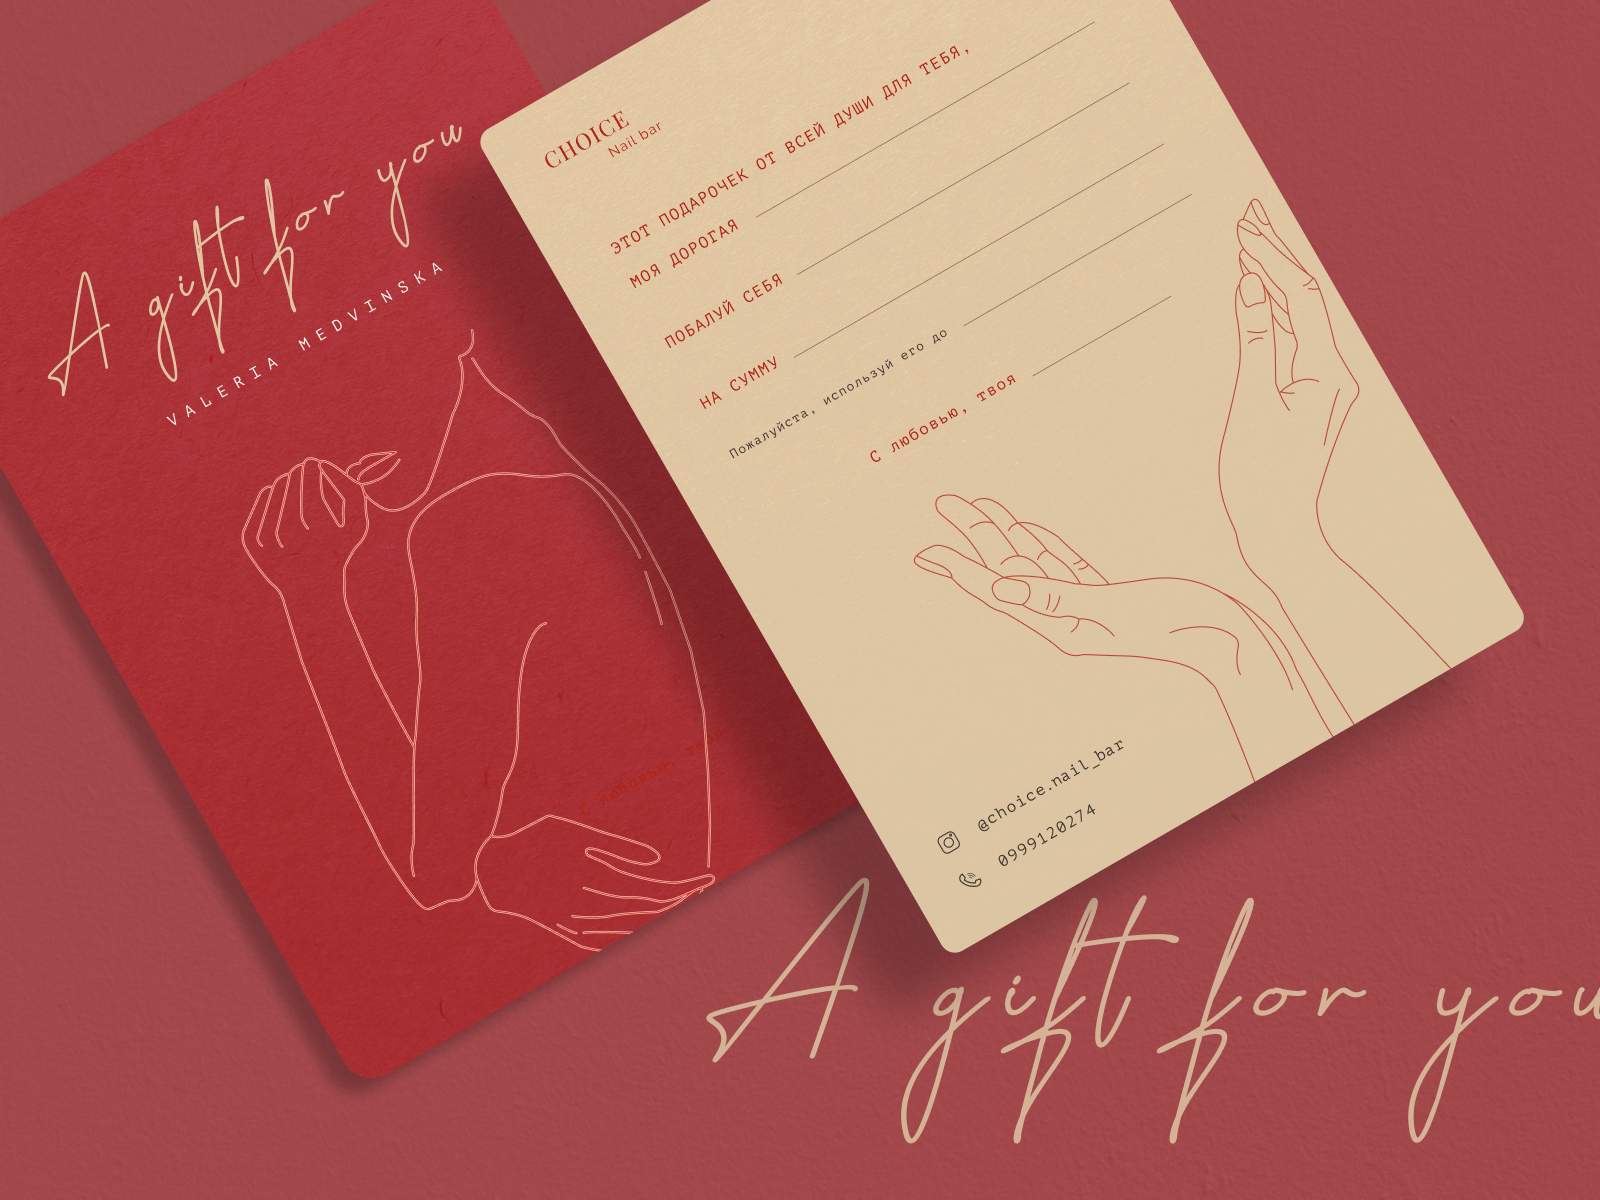 a-gift-certificate-by-daria-klymenko-on-dribbble